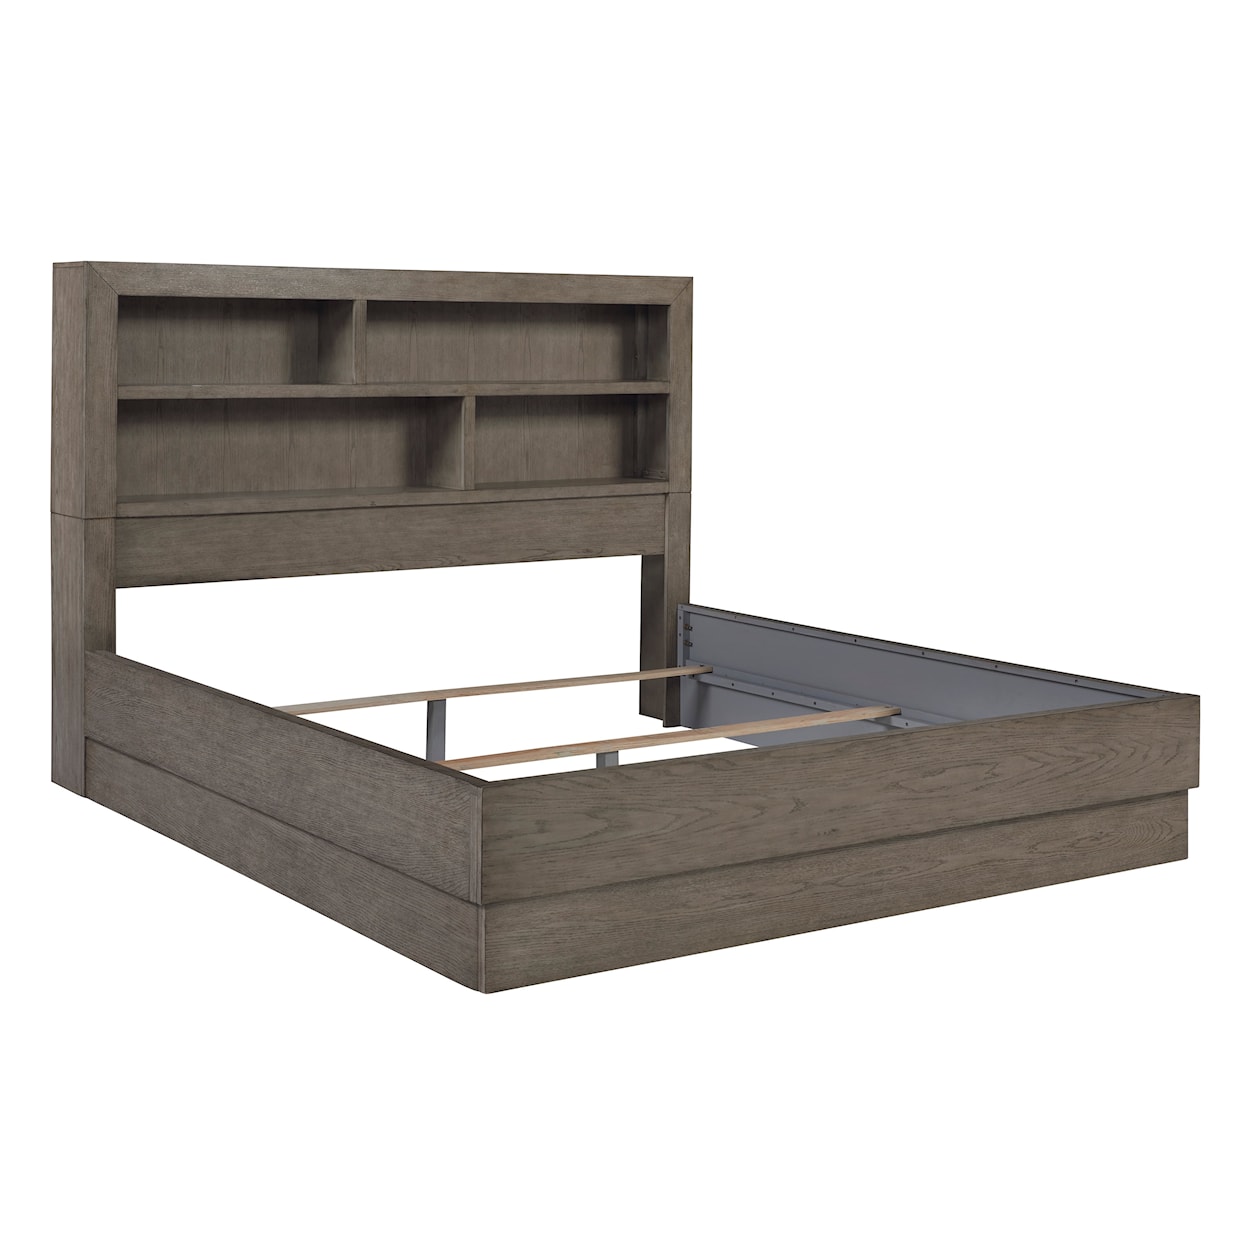 Ashley Furniture Benchcraft Anibecca Queen Bookcase Bed